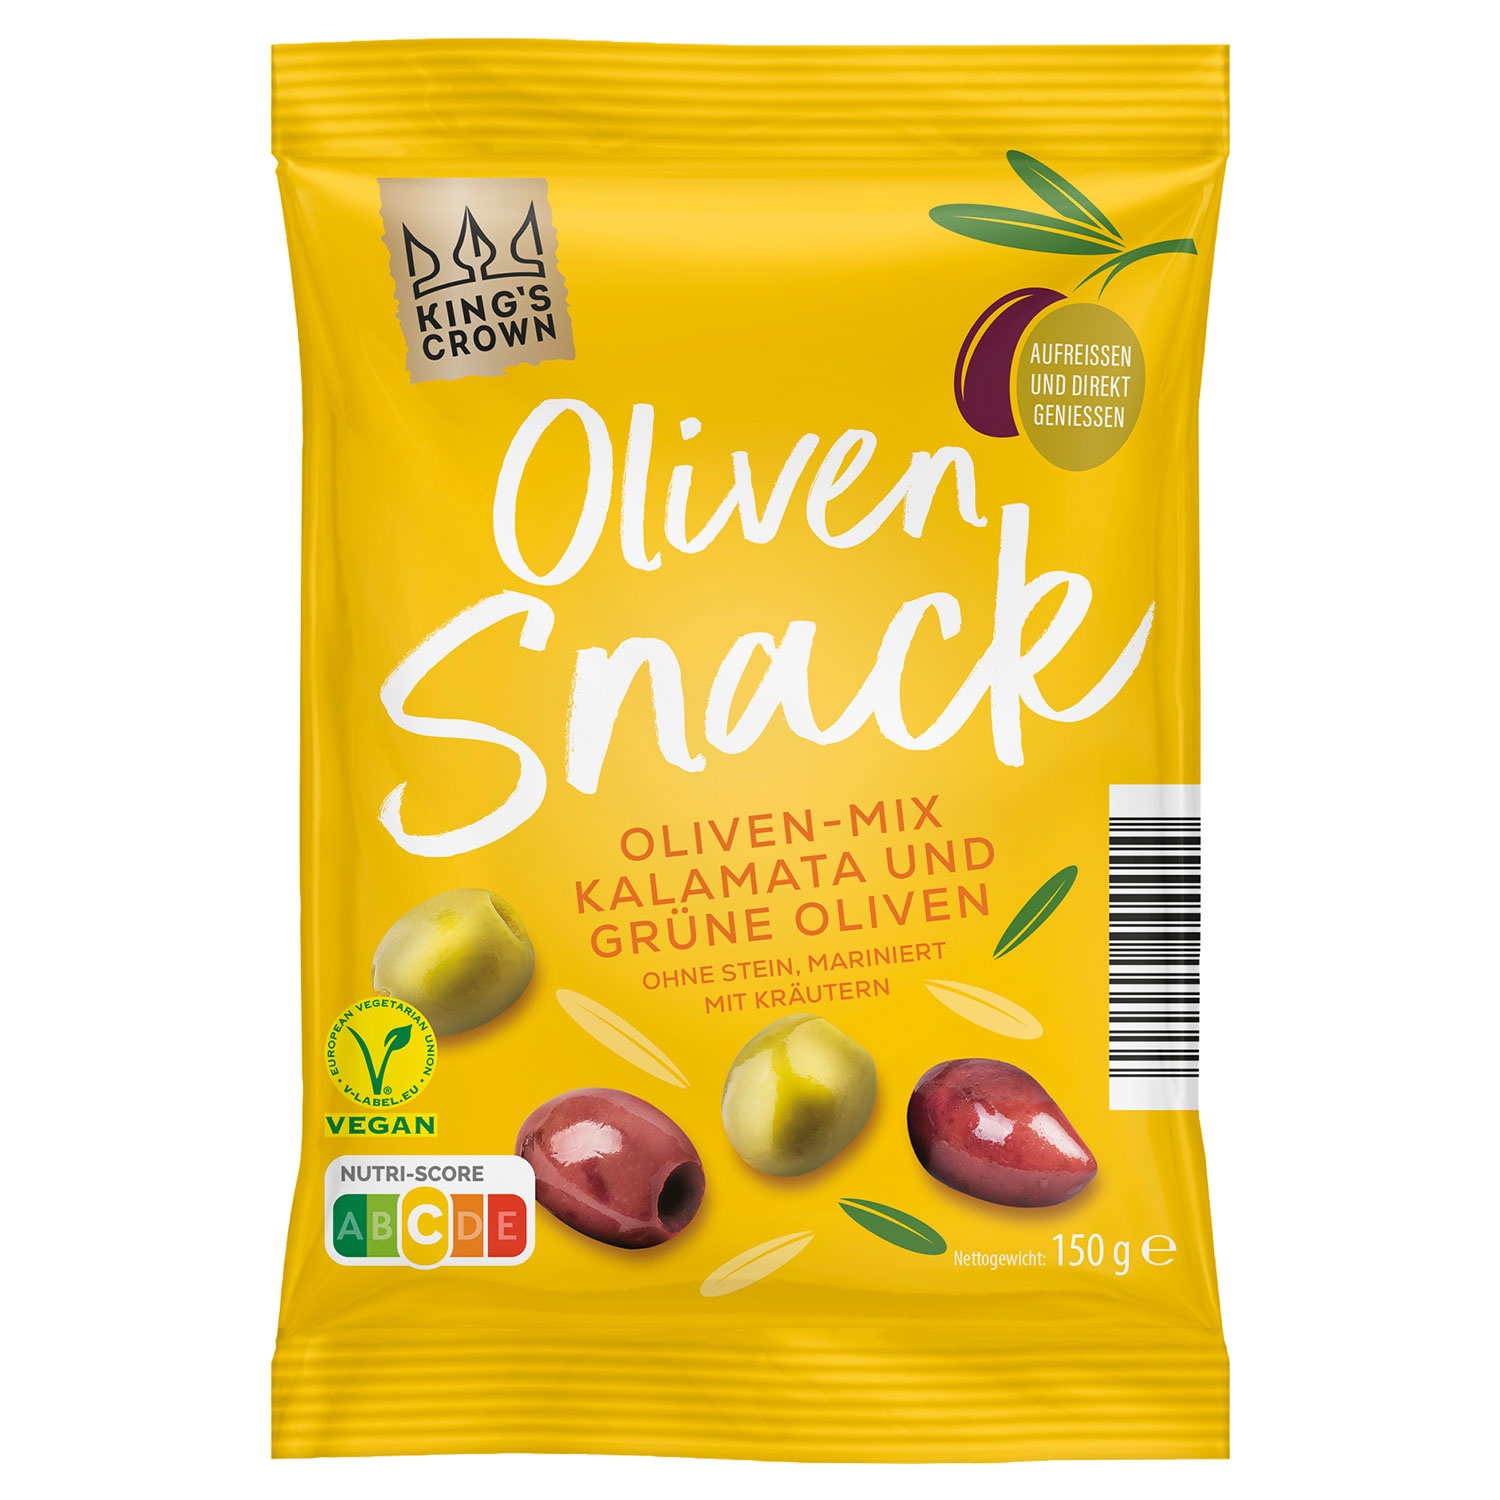 KING’S CROWN Oliven-Snack 150 g